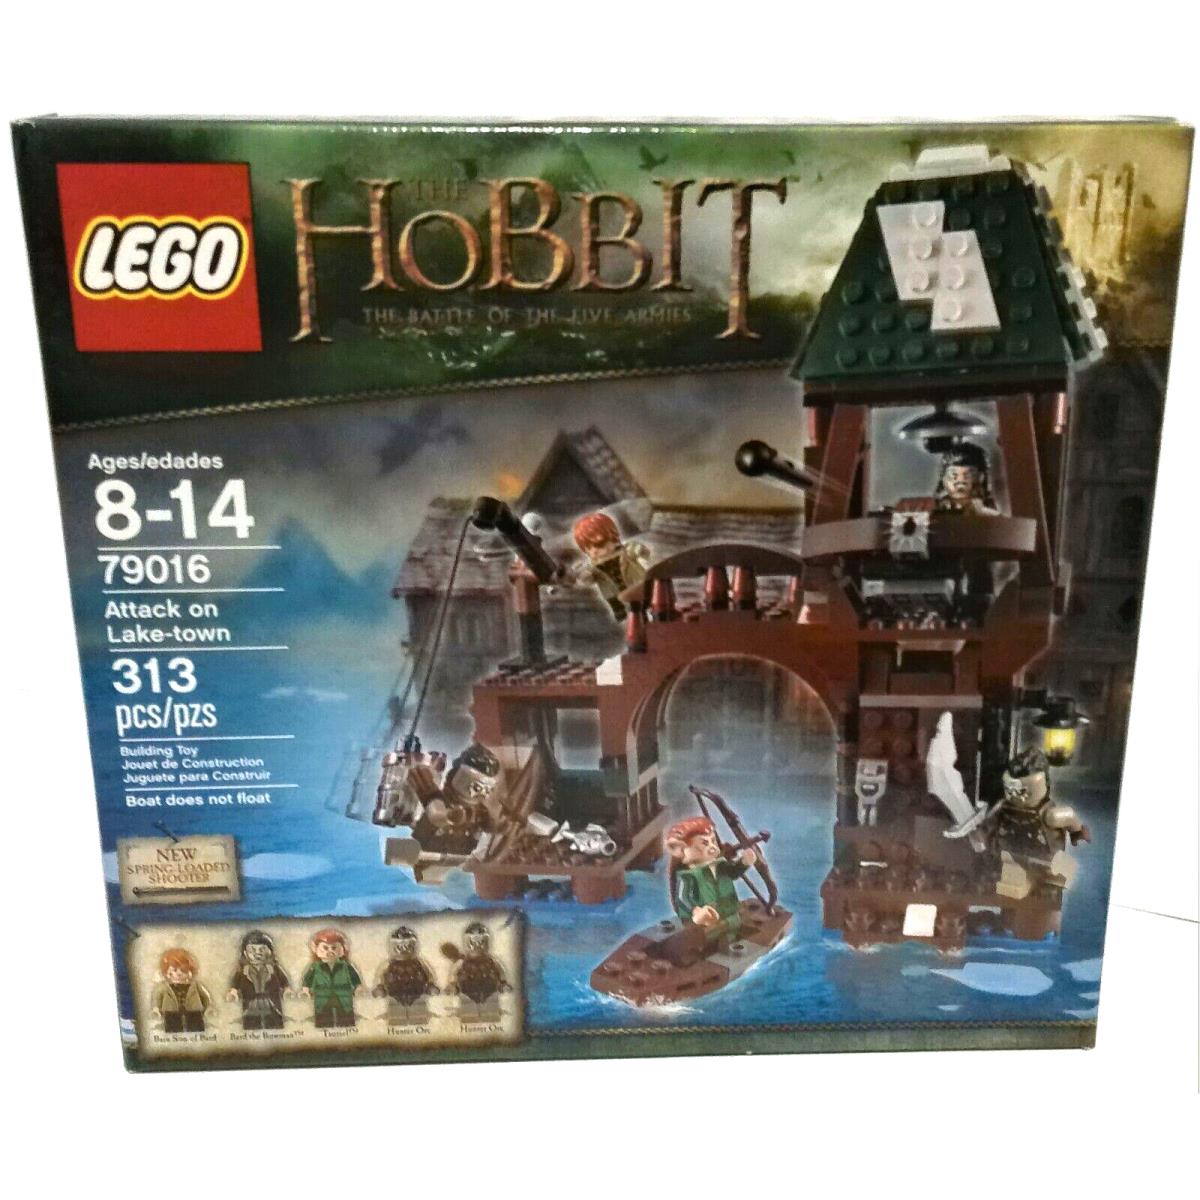 The Hobbit The Battle OF The Five Armies: 79016 Attack ON Lake-town Retired Misb